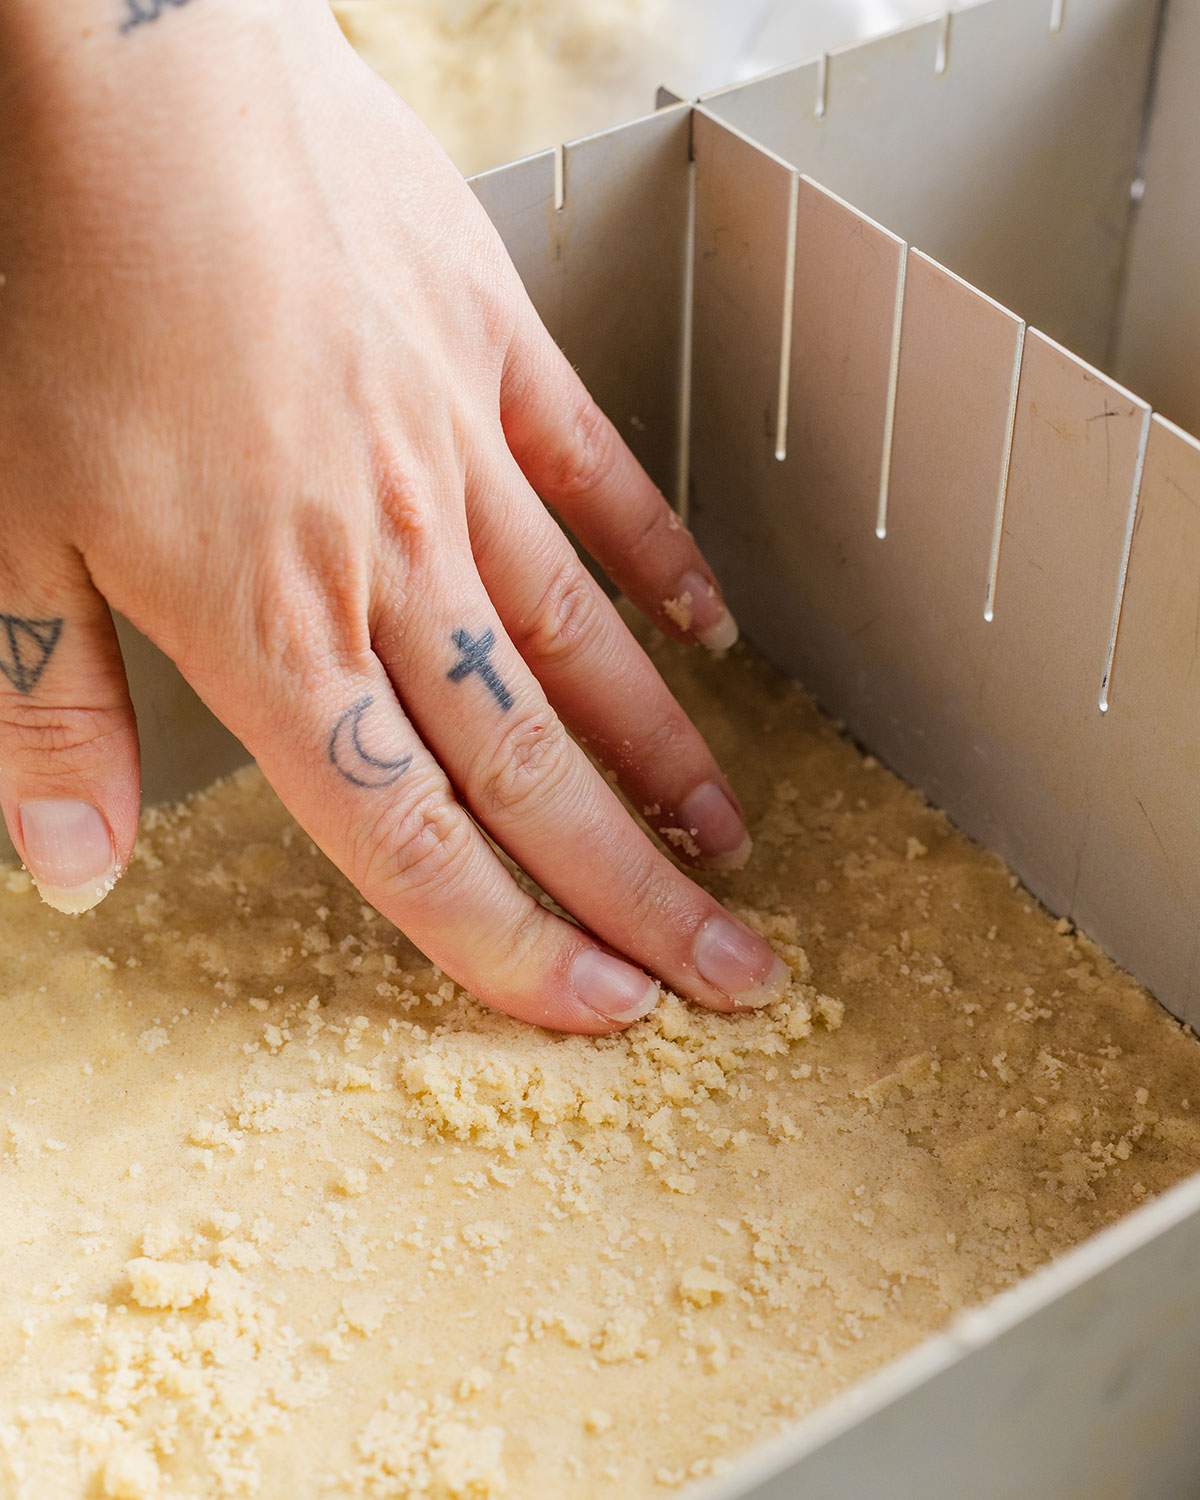 A hand is pressing part of the crumble mix into the bottom of the oven dish to create the base.